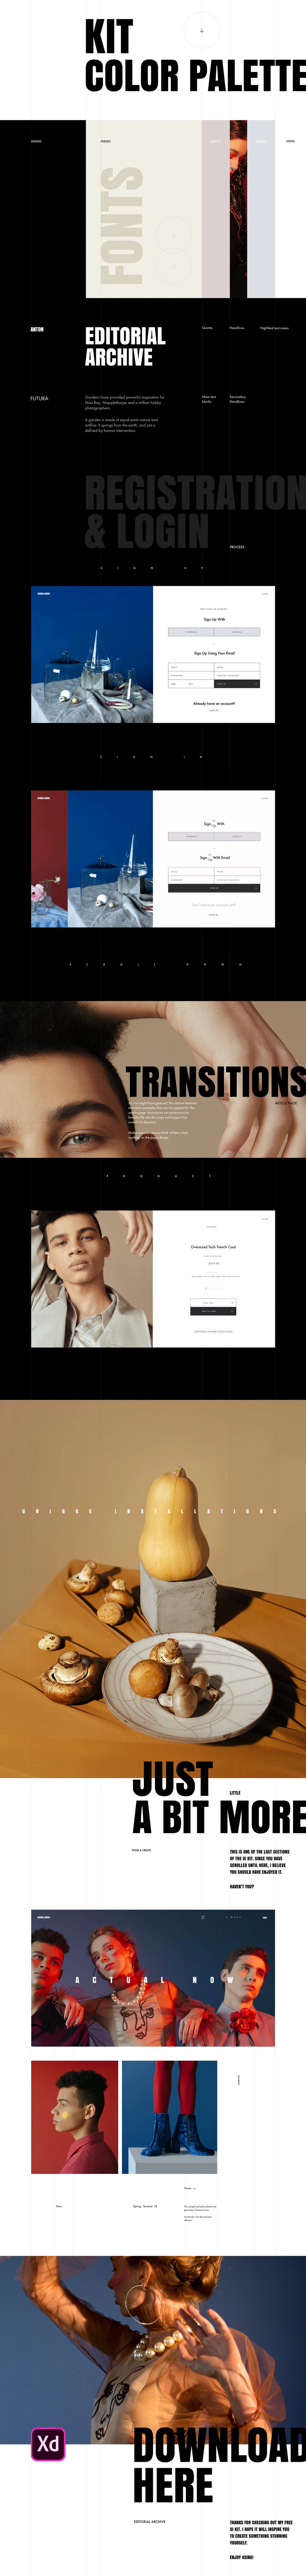 Fashion Editorial UI Kit for Adobe XD - This editorial and e-commerce UI Kit features 18 different design pages and more than 120 various components. This UI kit is built to help users create fashion editorial, as well as designer marketplace, apps, and websites. It features elements for a homepage, product grid, single product page, and blog.